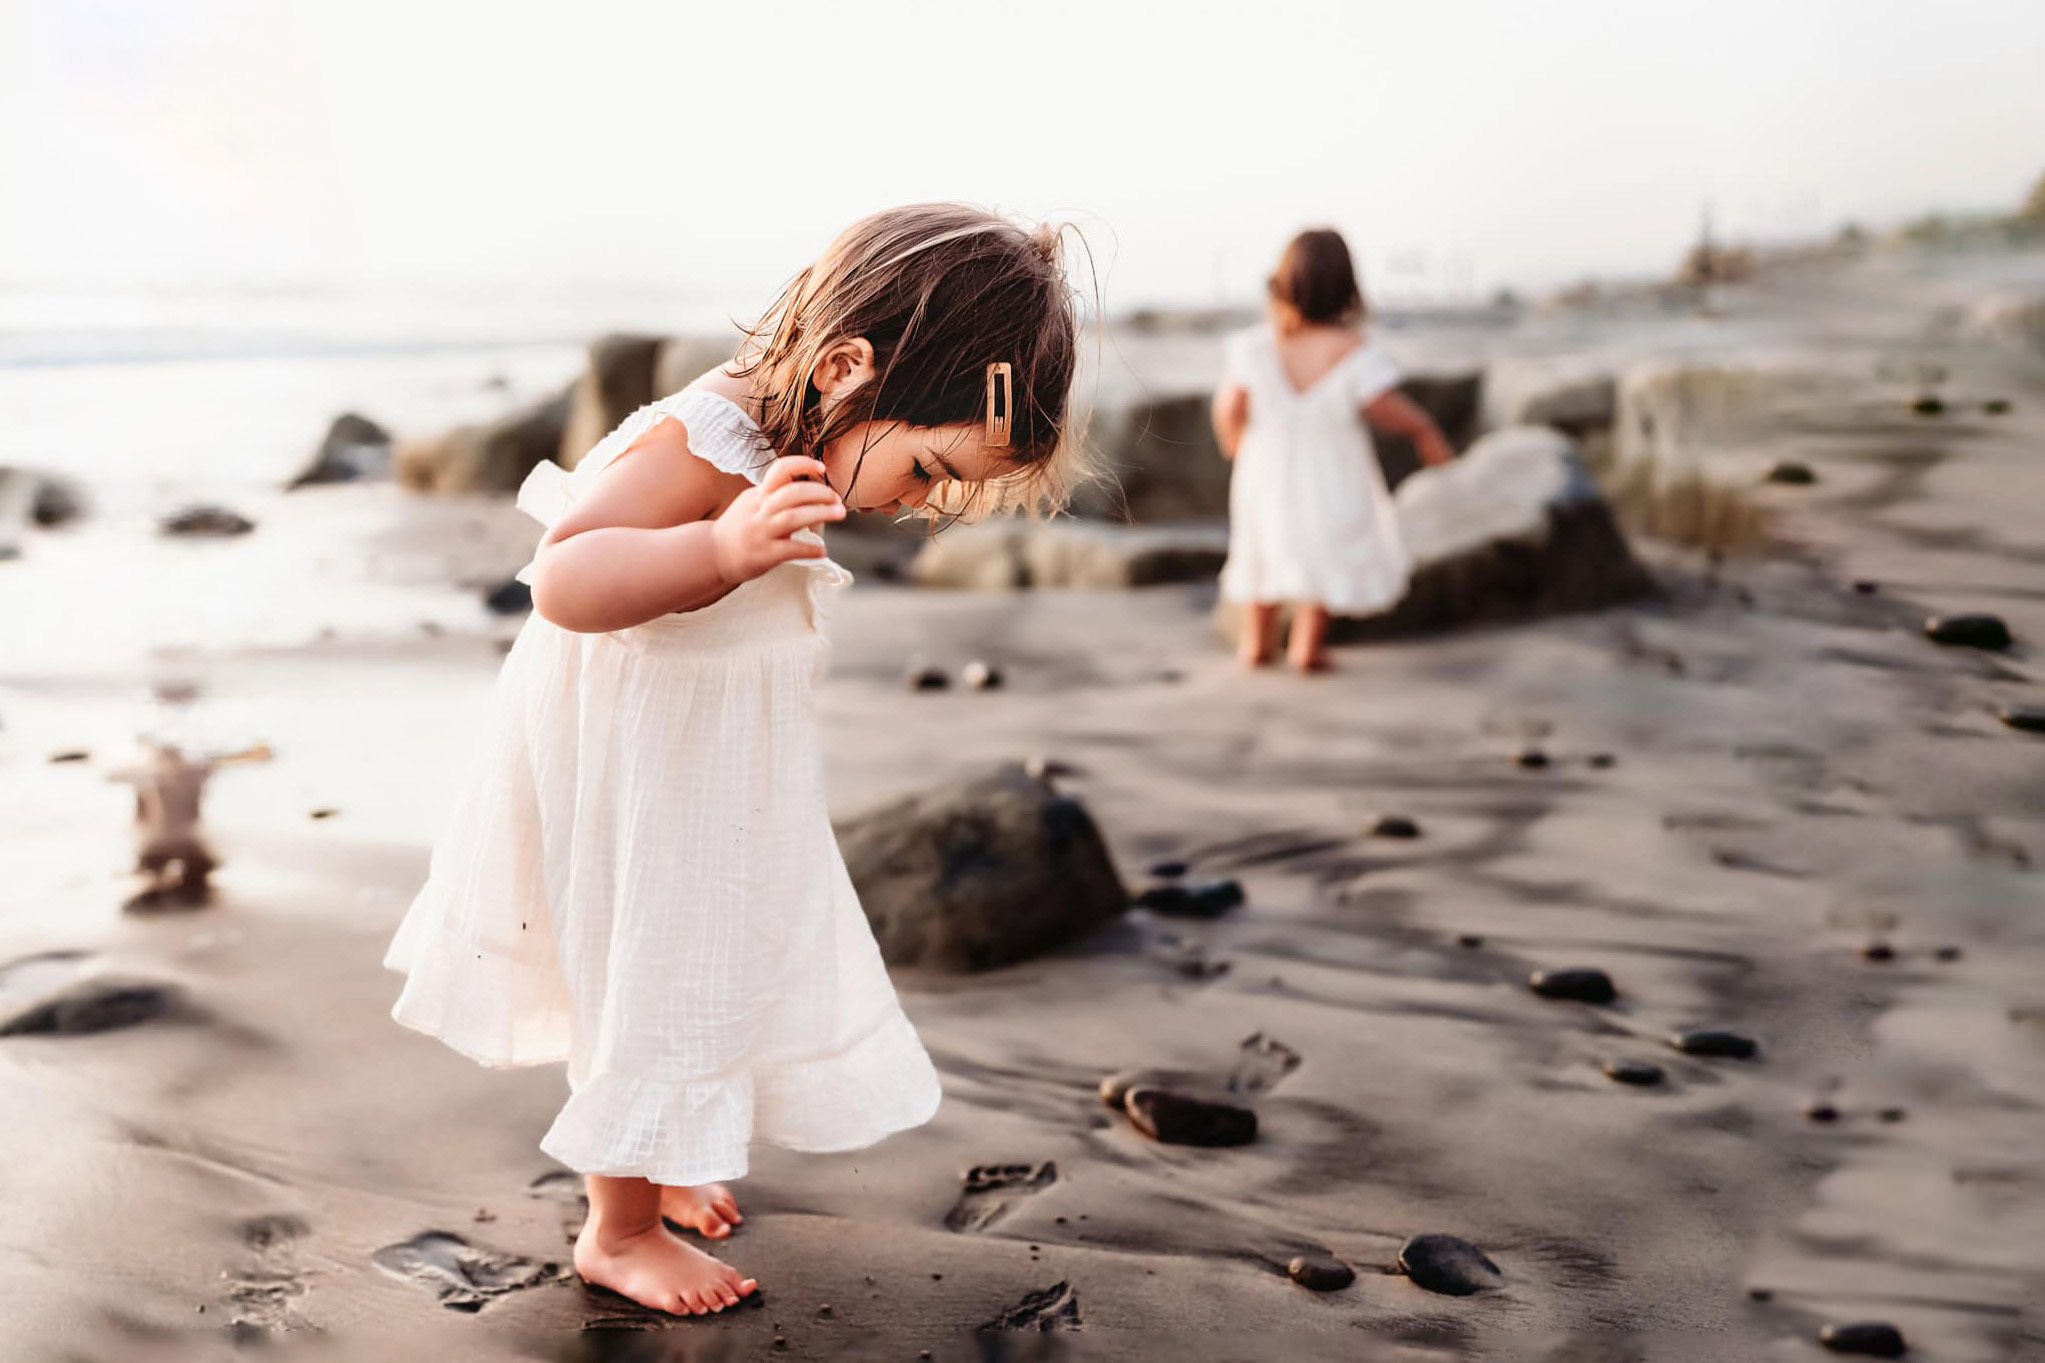 A toddler girl in a white dress stands on the beach in Del Mar, California, looking at the sand around her feet.